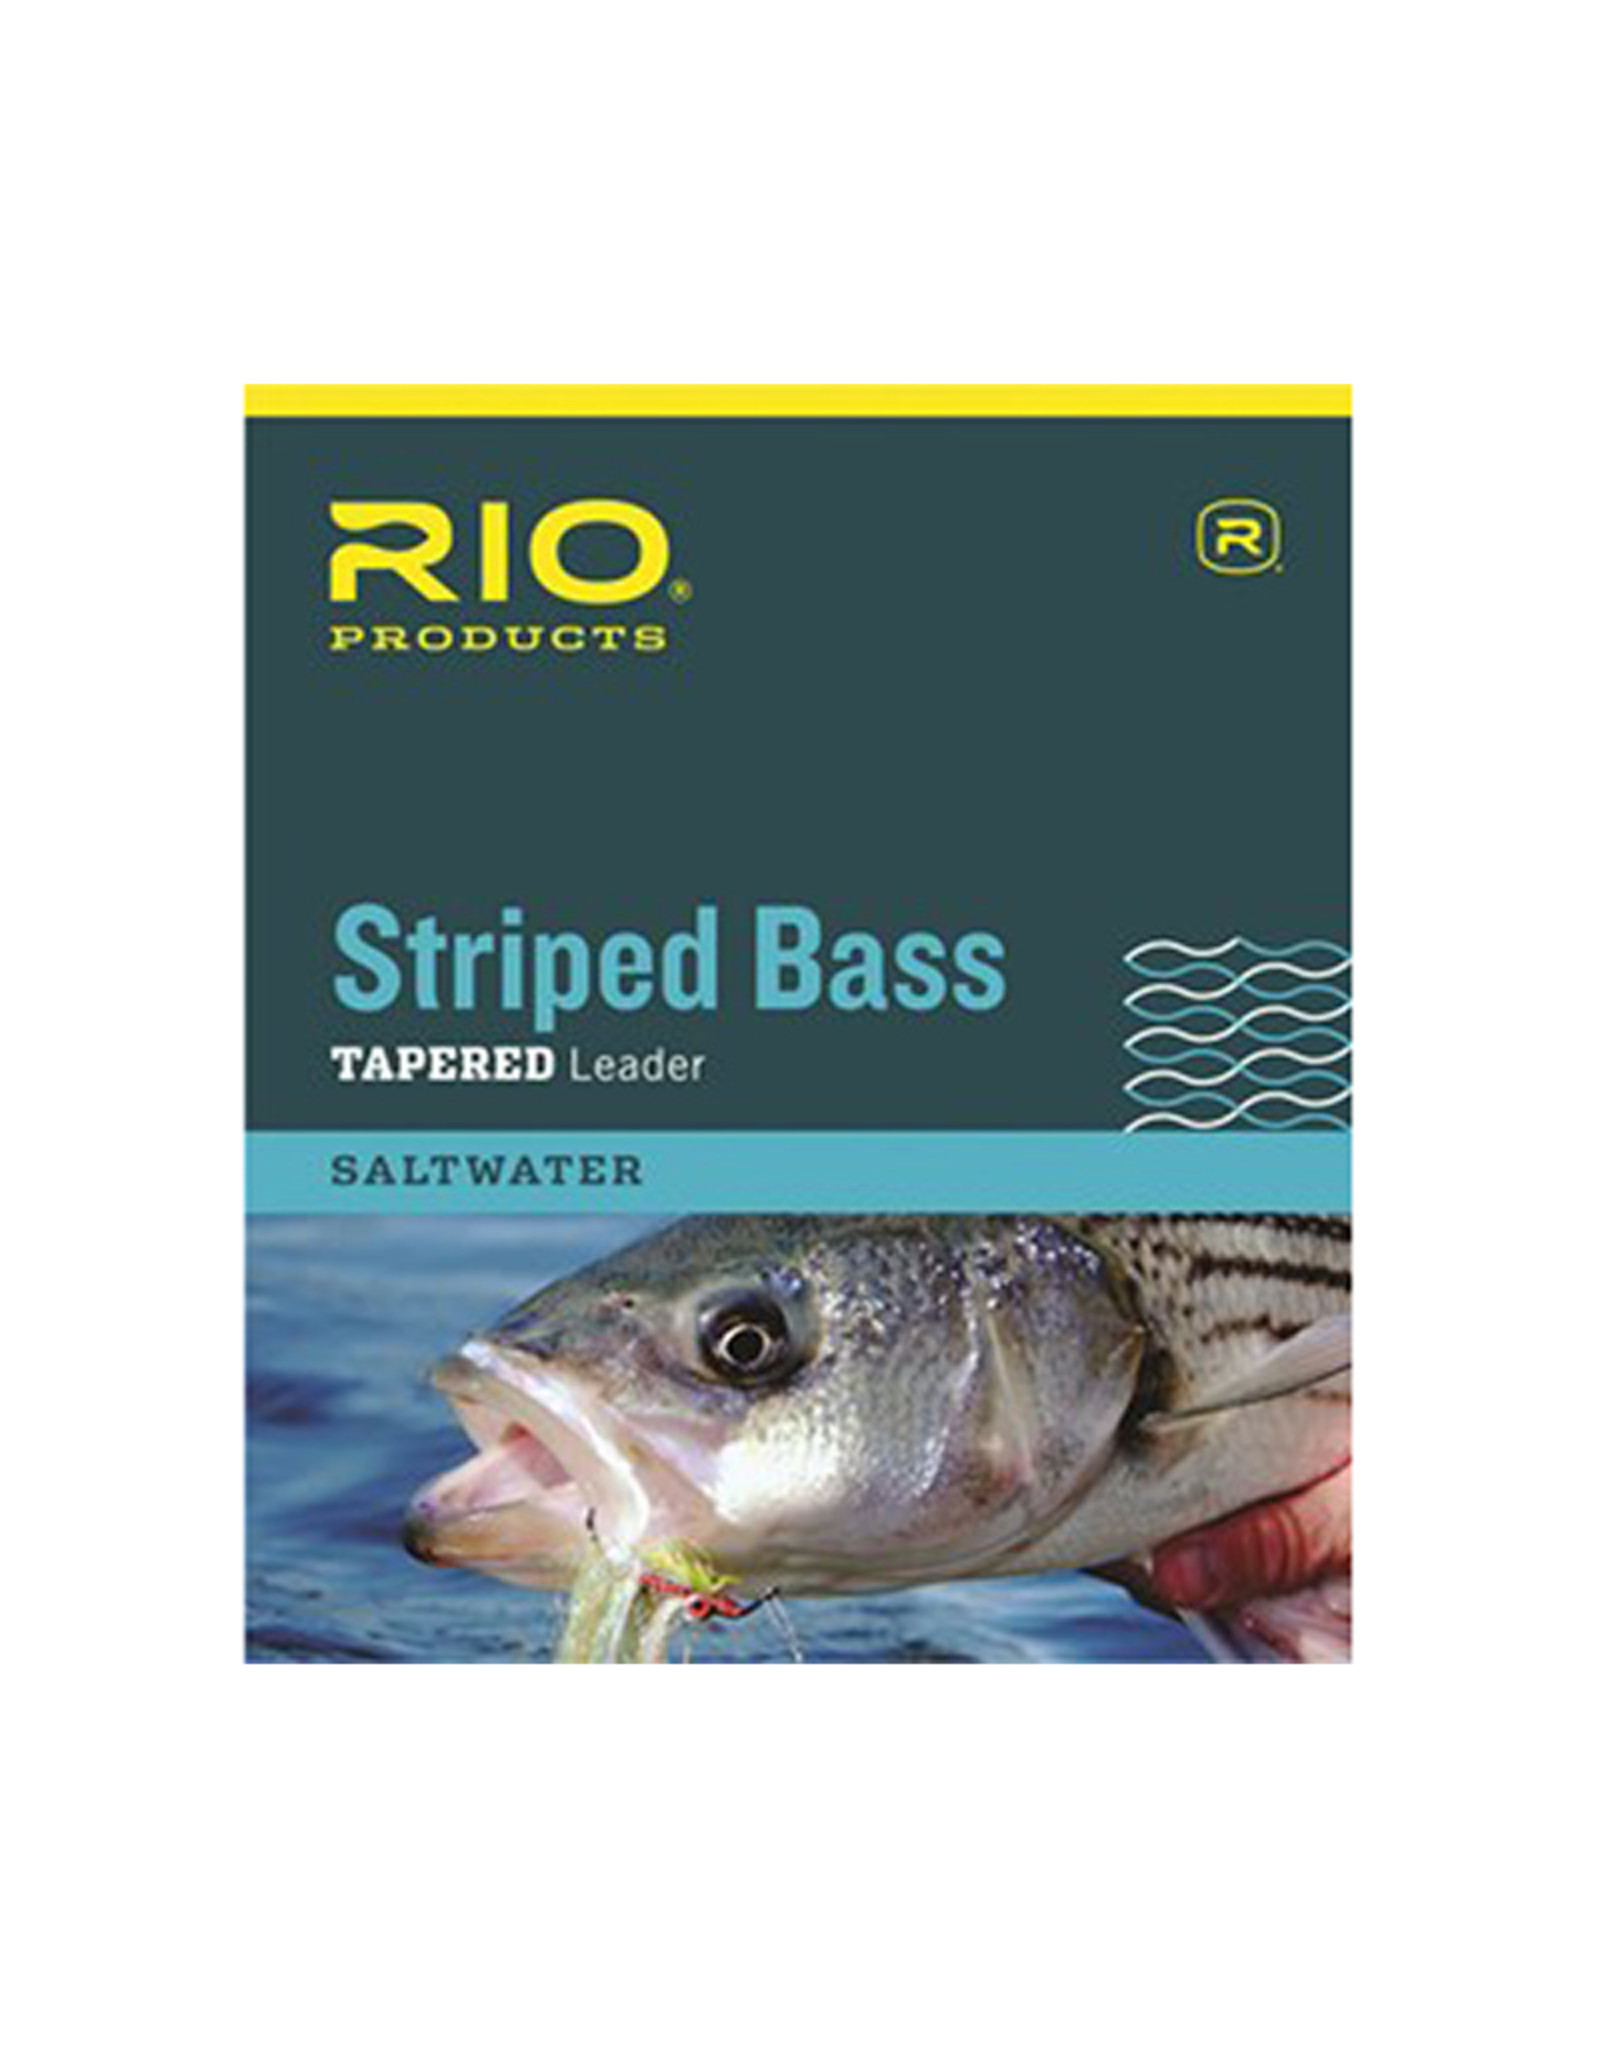 RIO Products Striped Bass 7ft Tapered Leader